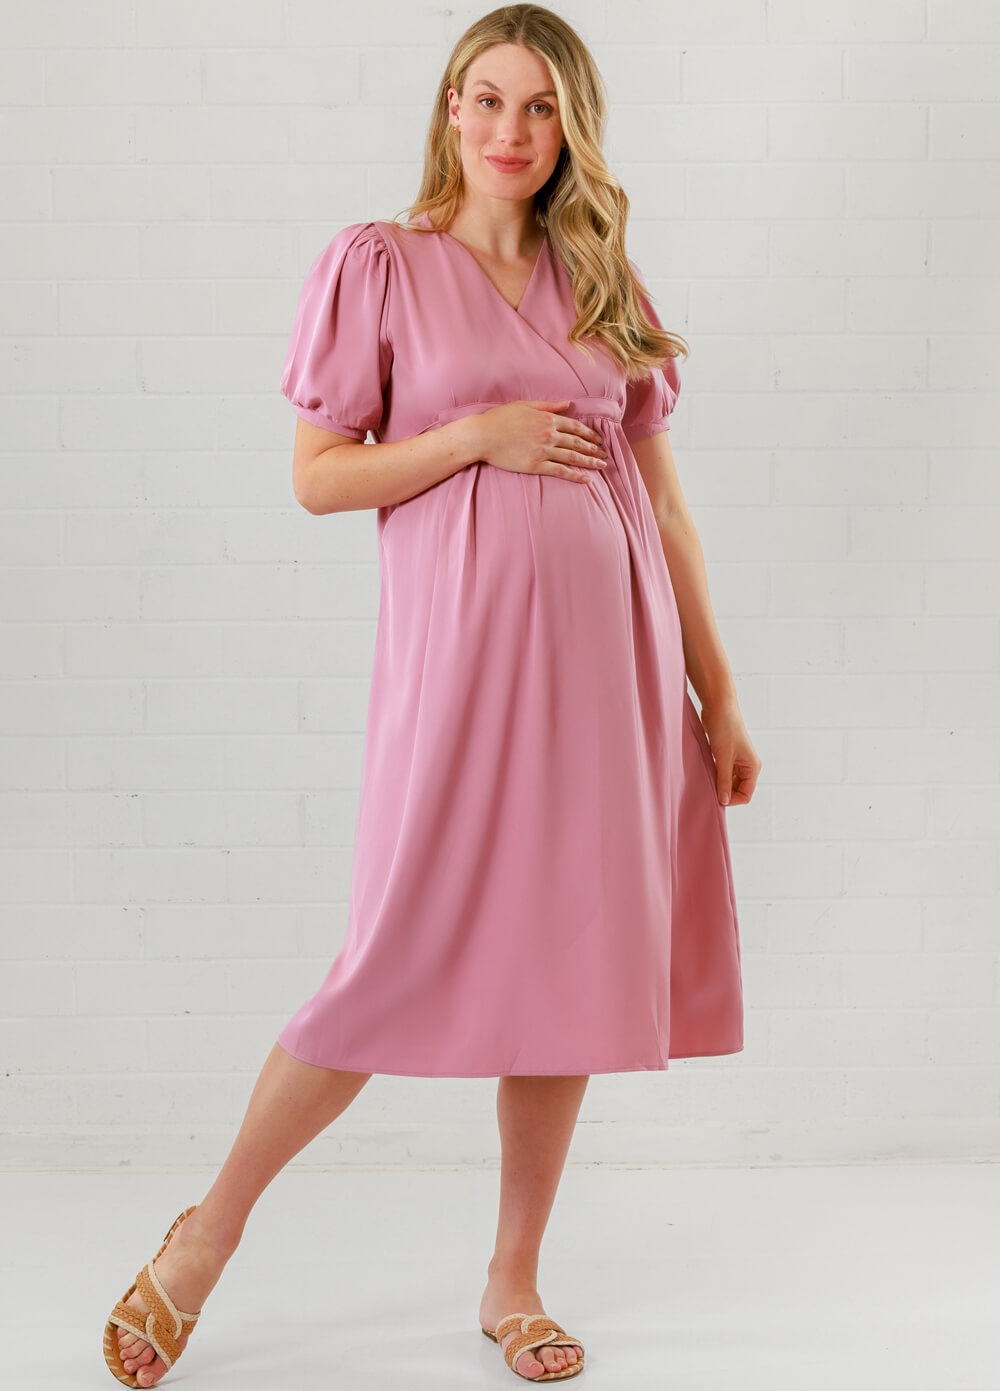 Lait & Co - Anna-Elea Maternity Cocktail Dress in Pink